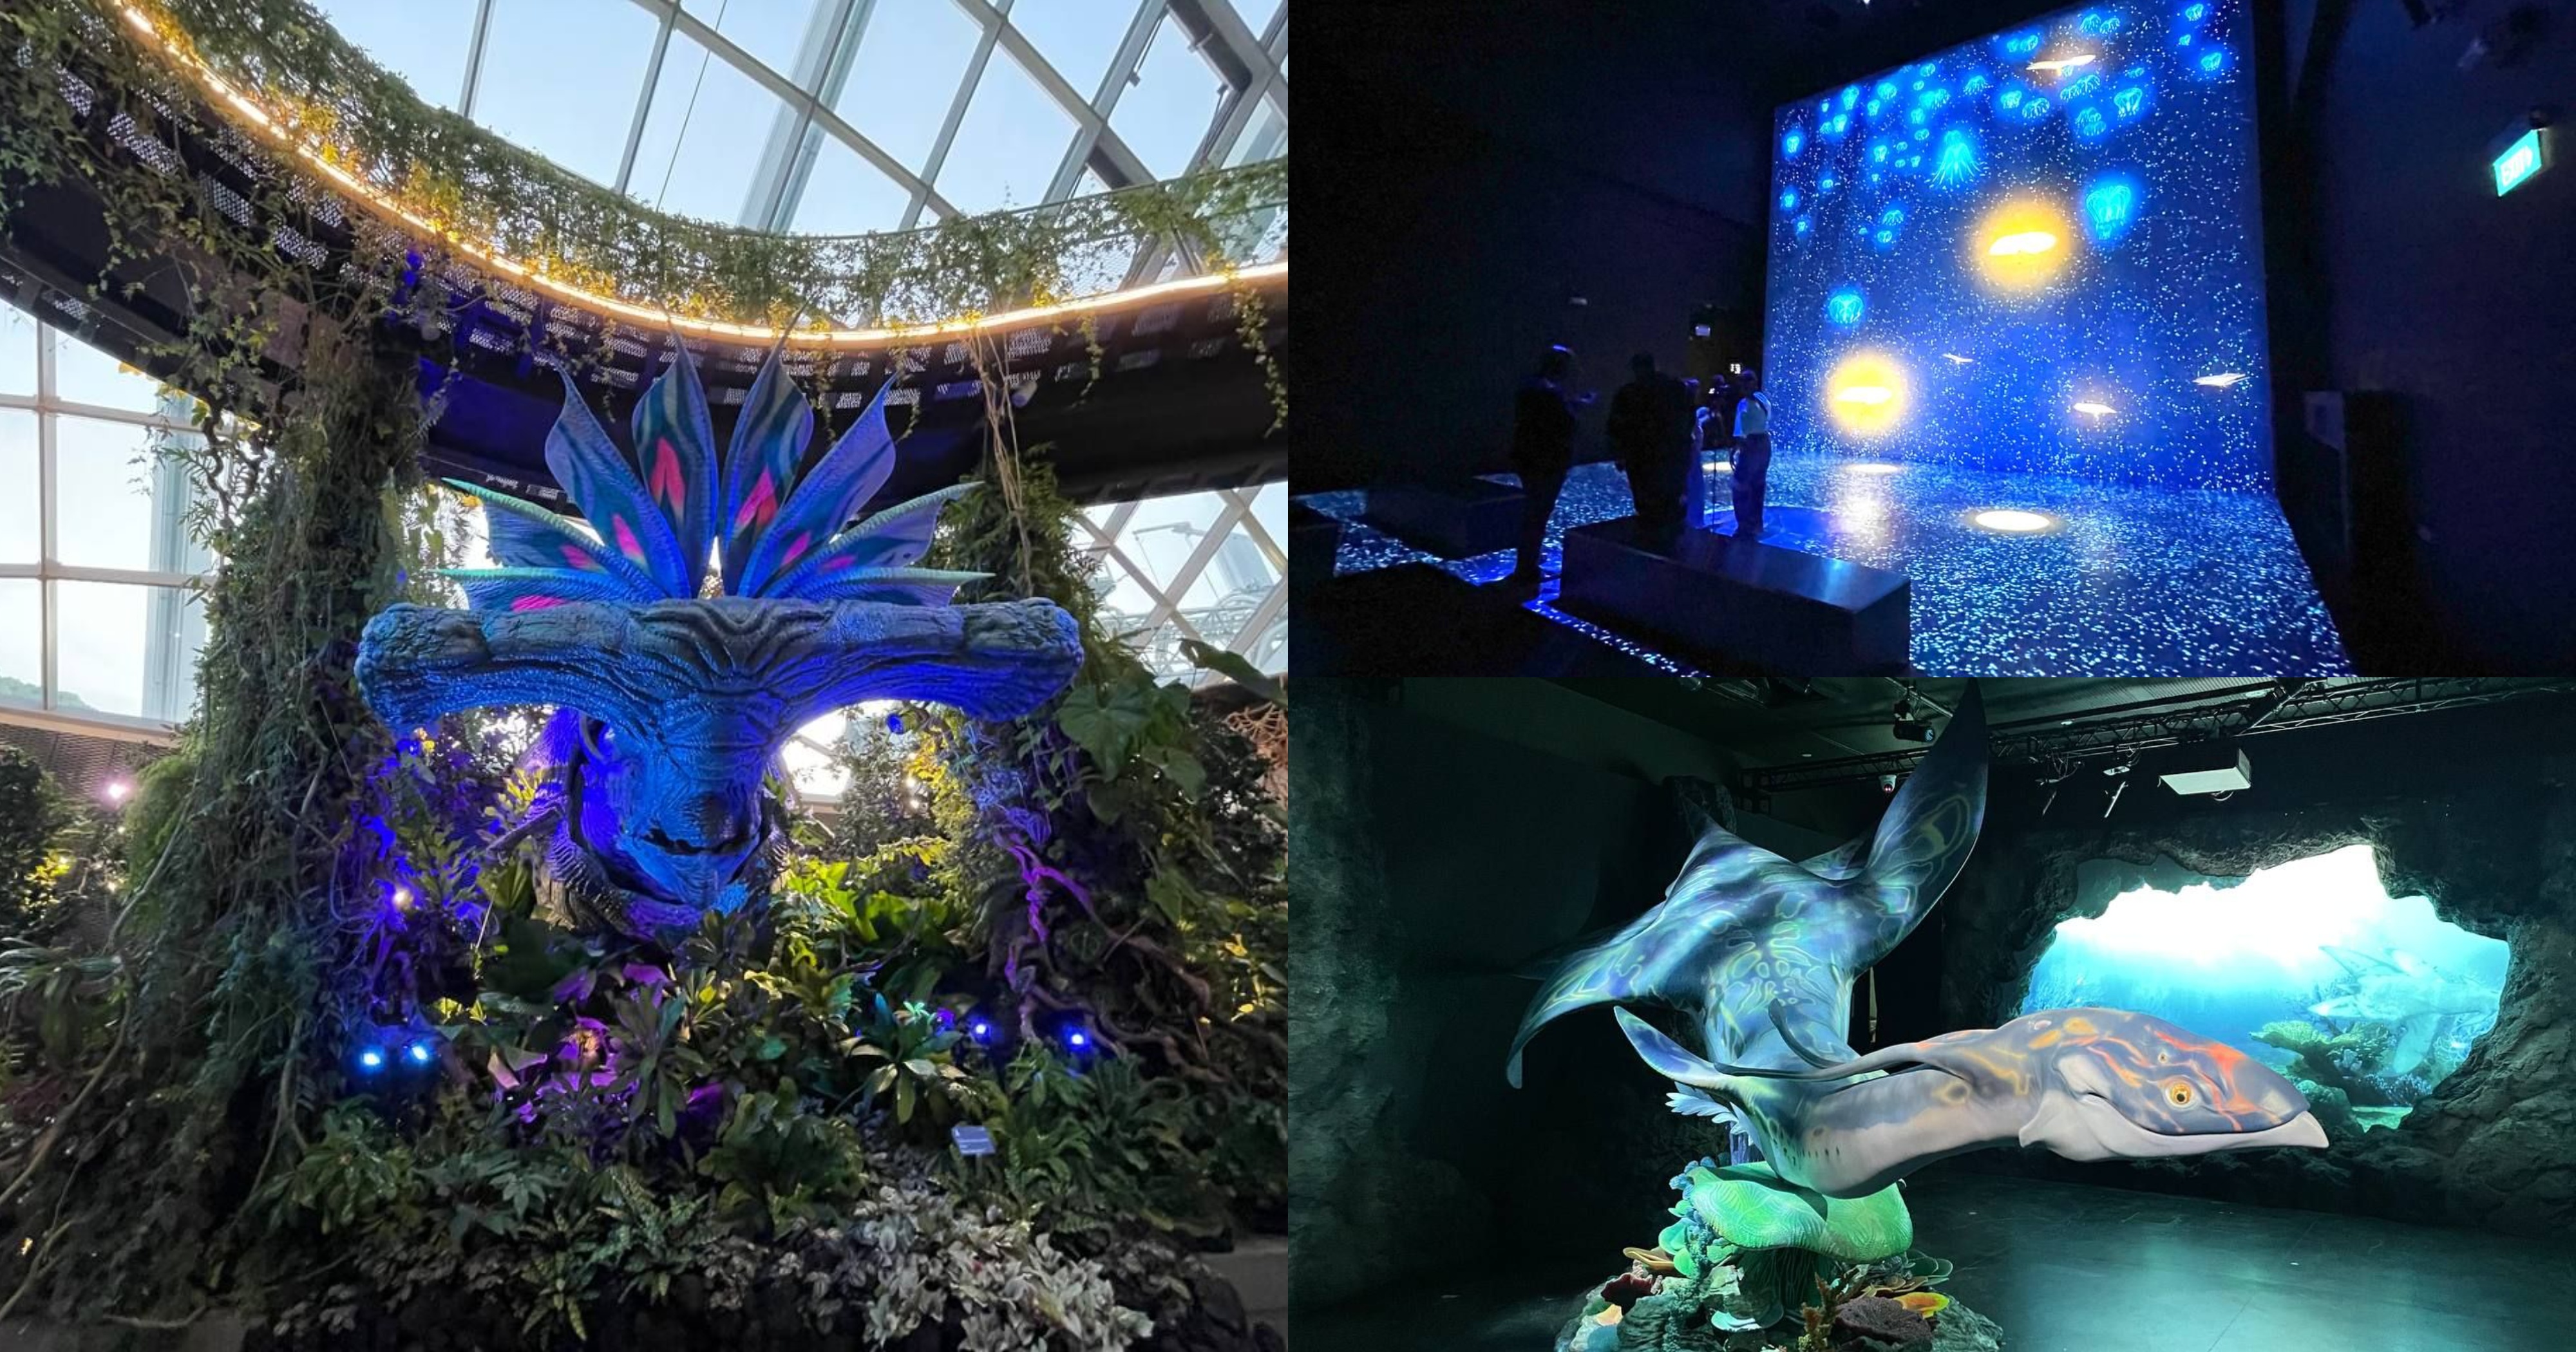 Avatar The Experience  an immersive walkthrough event coming to Gardens  By The Bay